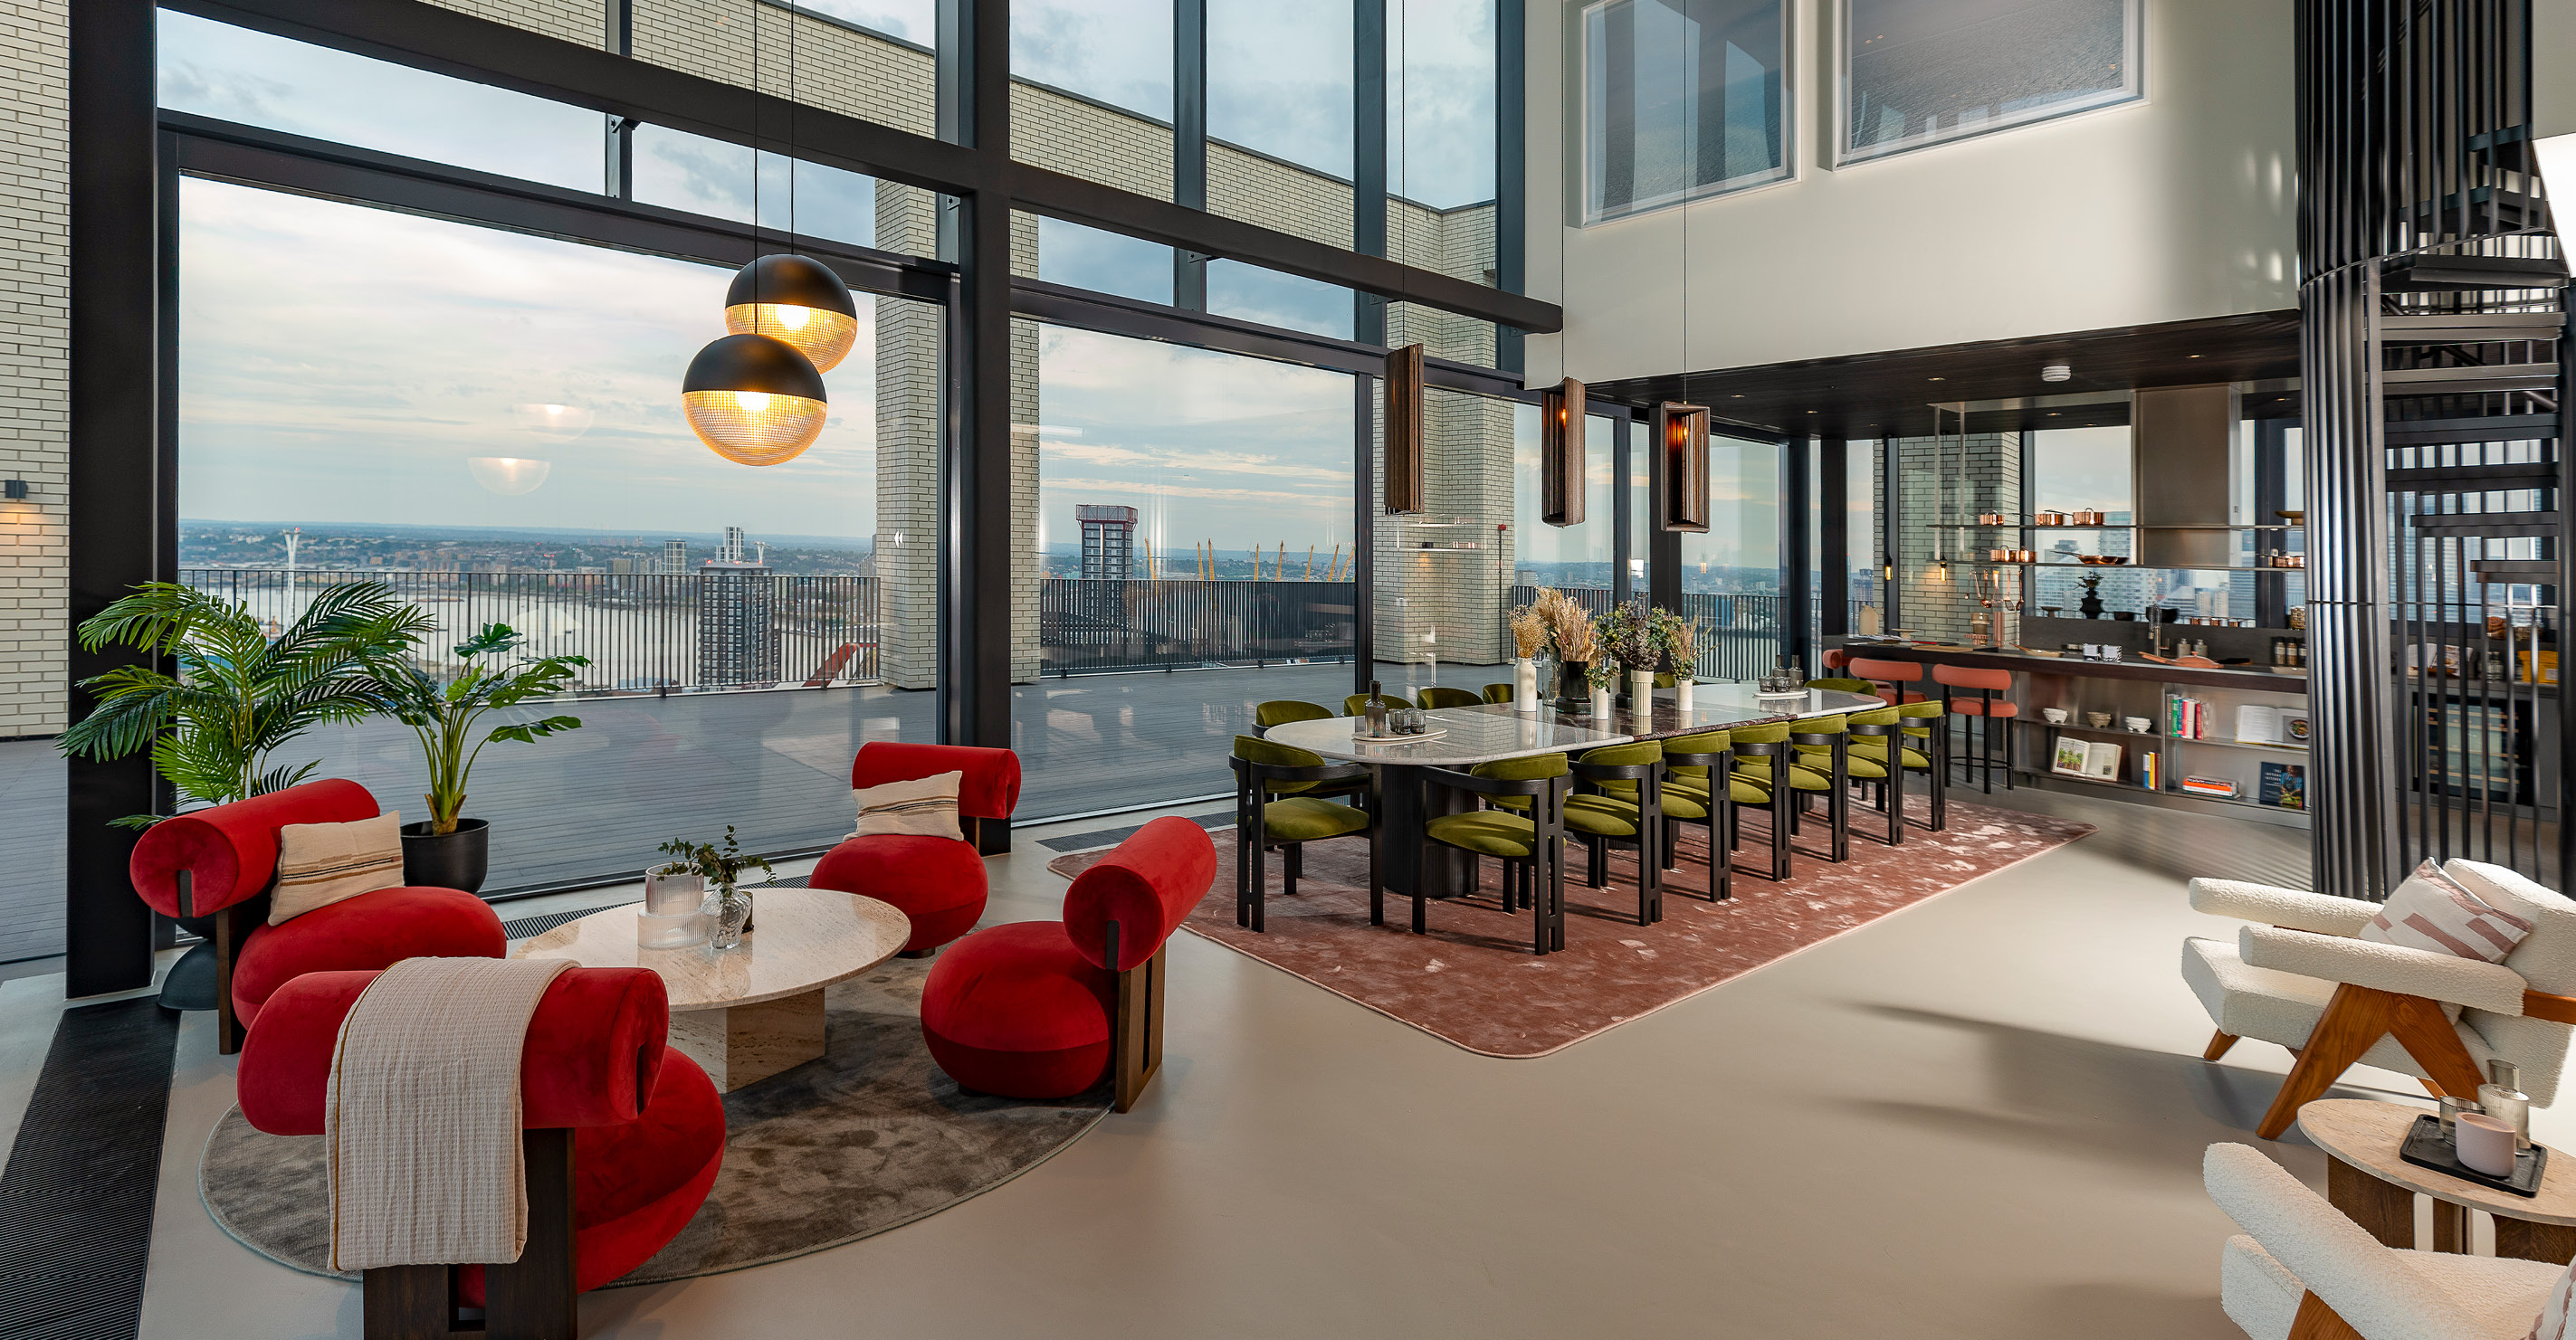 Join a Penthouse Conversations event at London City Island for an exciting evening in beautiful surroundings